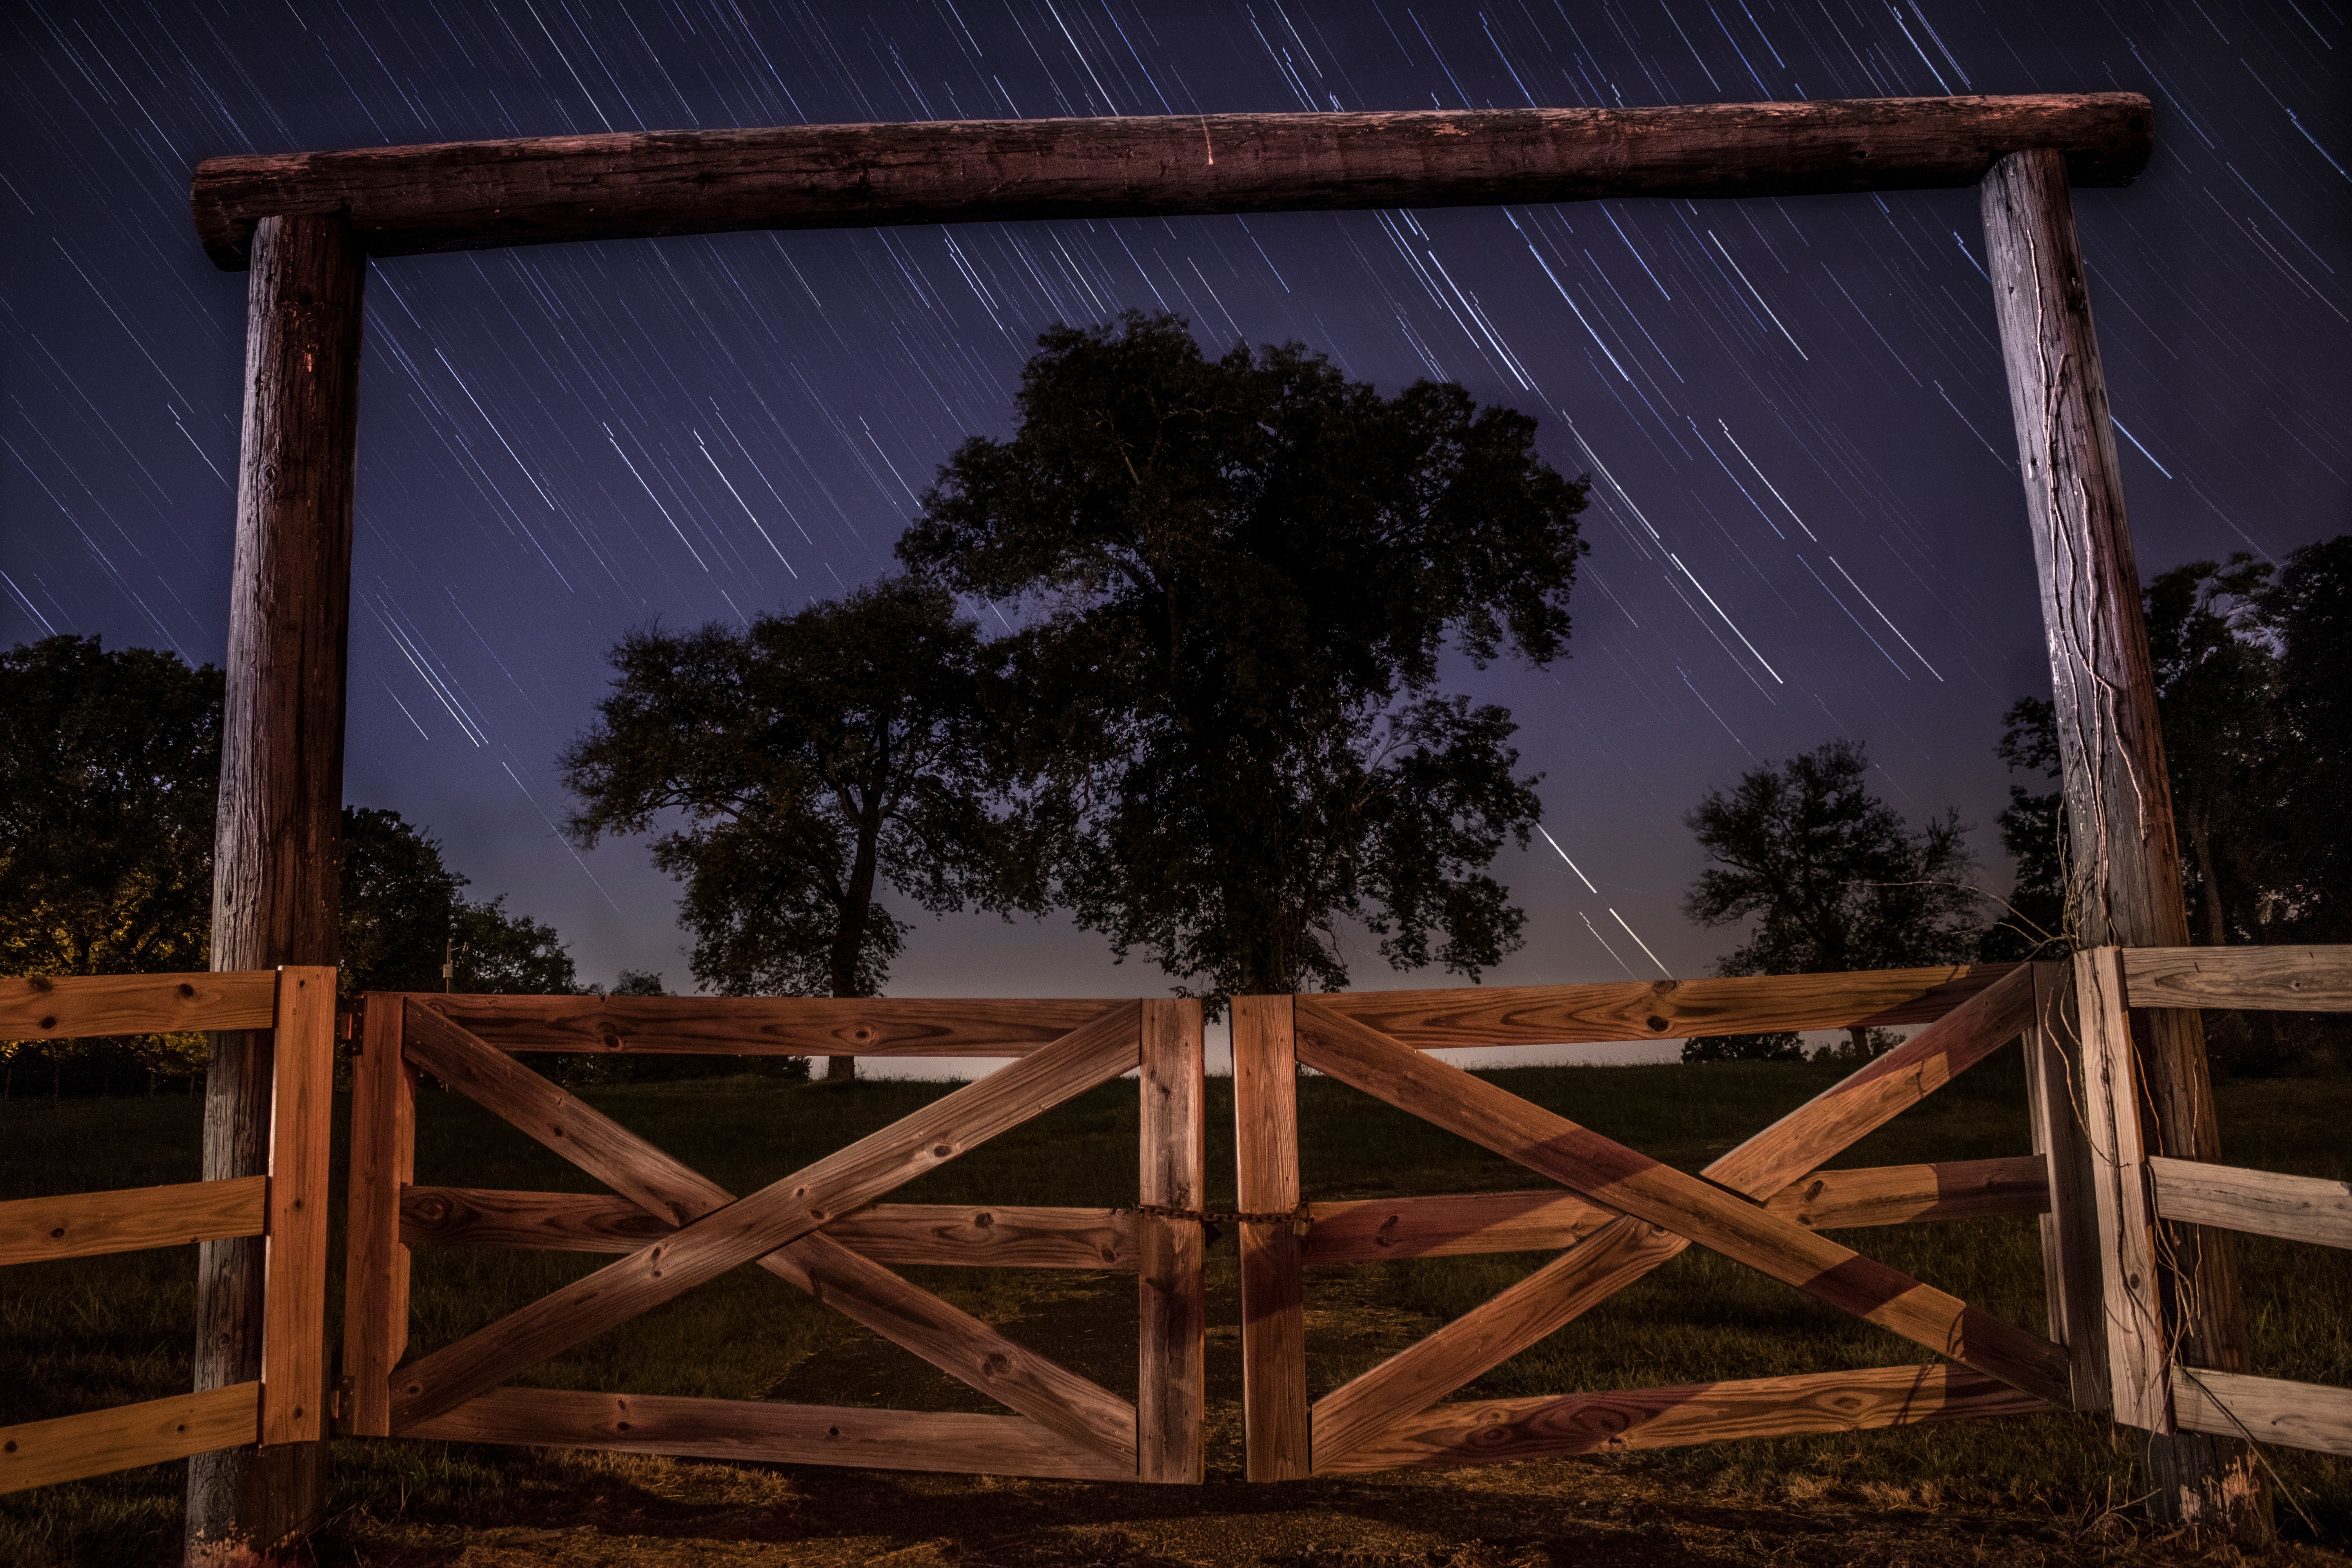 brown wooden barn gate near green leaved trees during nighttime